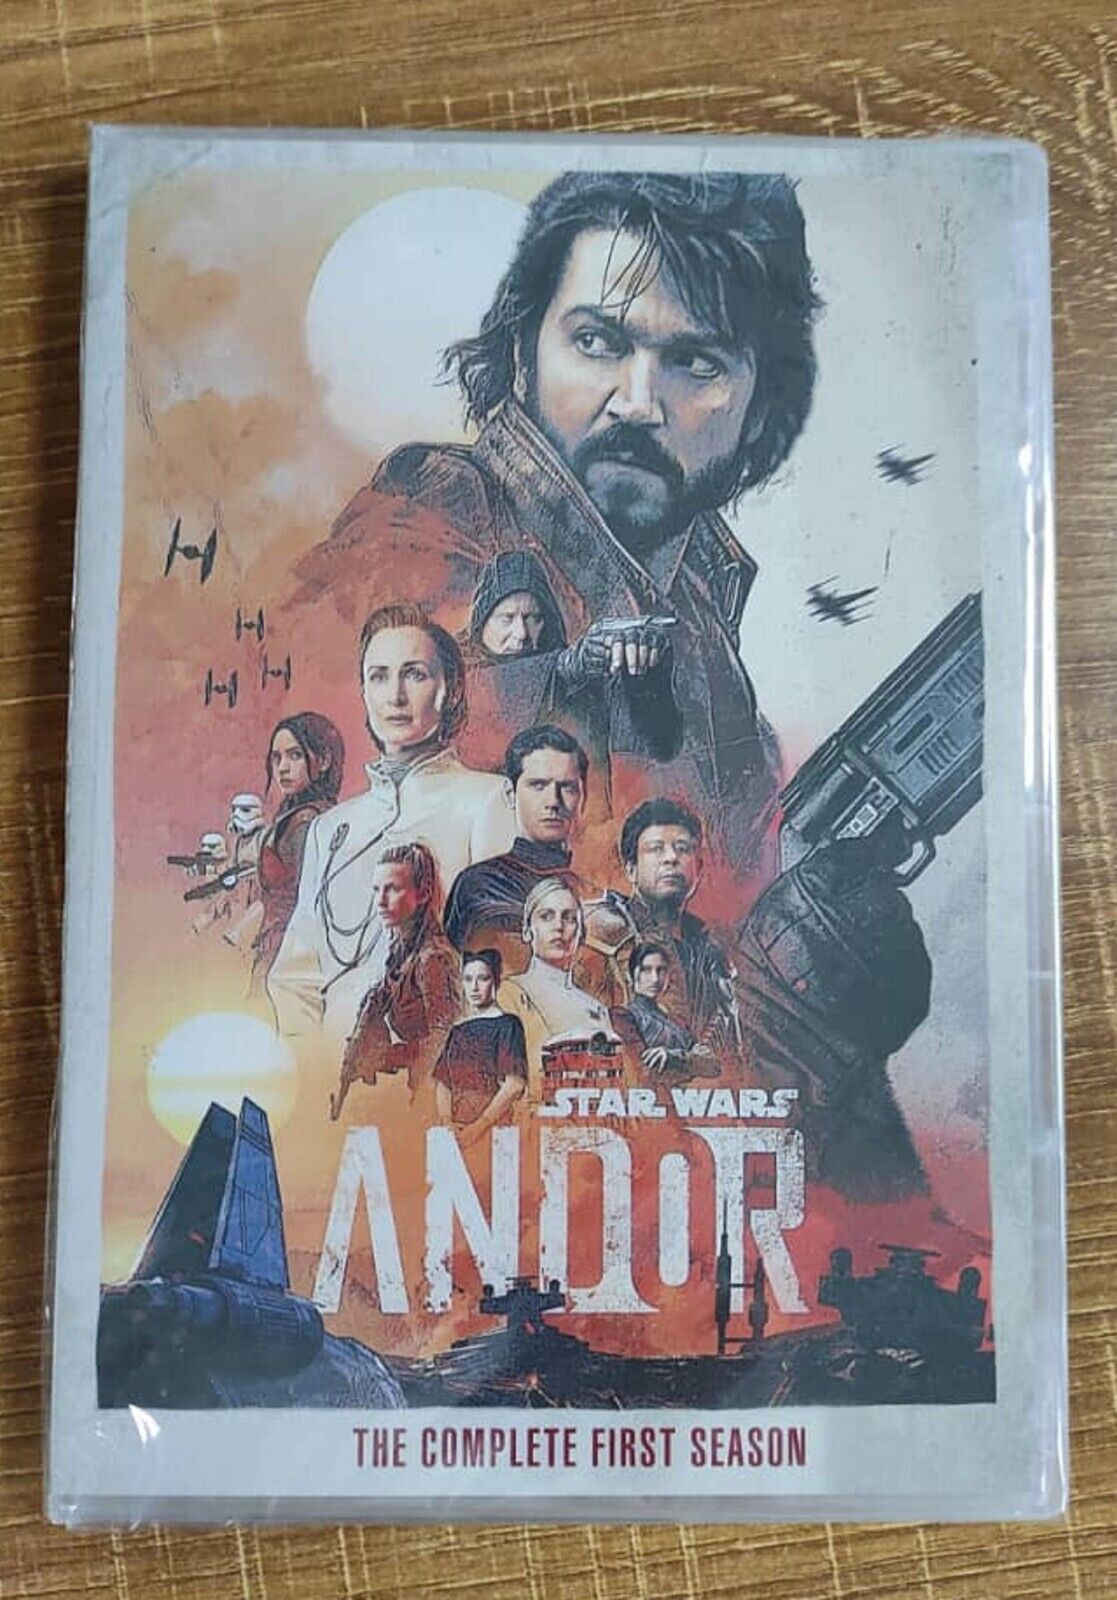 Star wars andor: The Complete Series,Season 1(DVD) Brand New / Fast Shipping